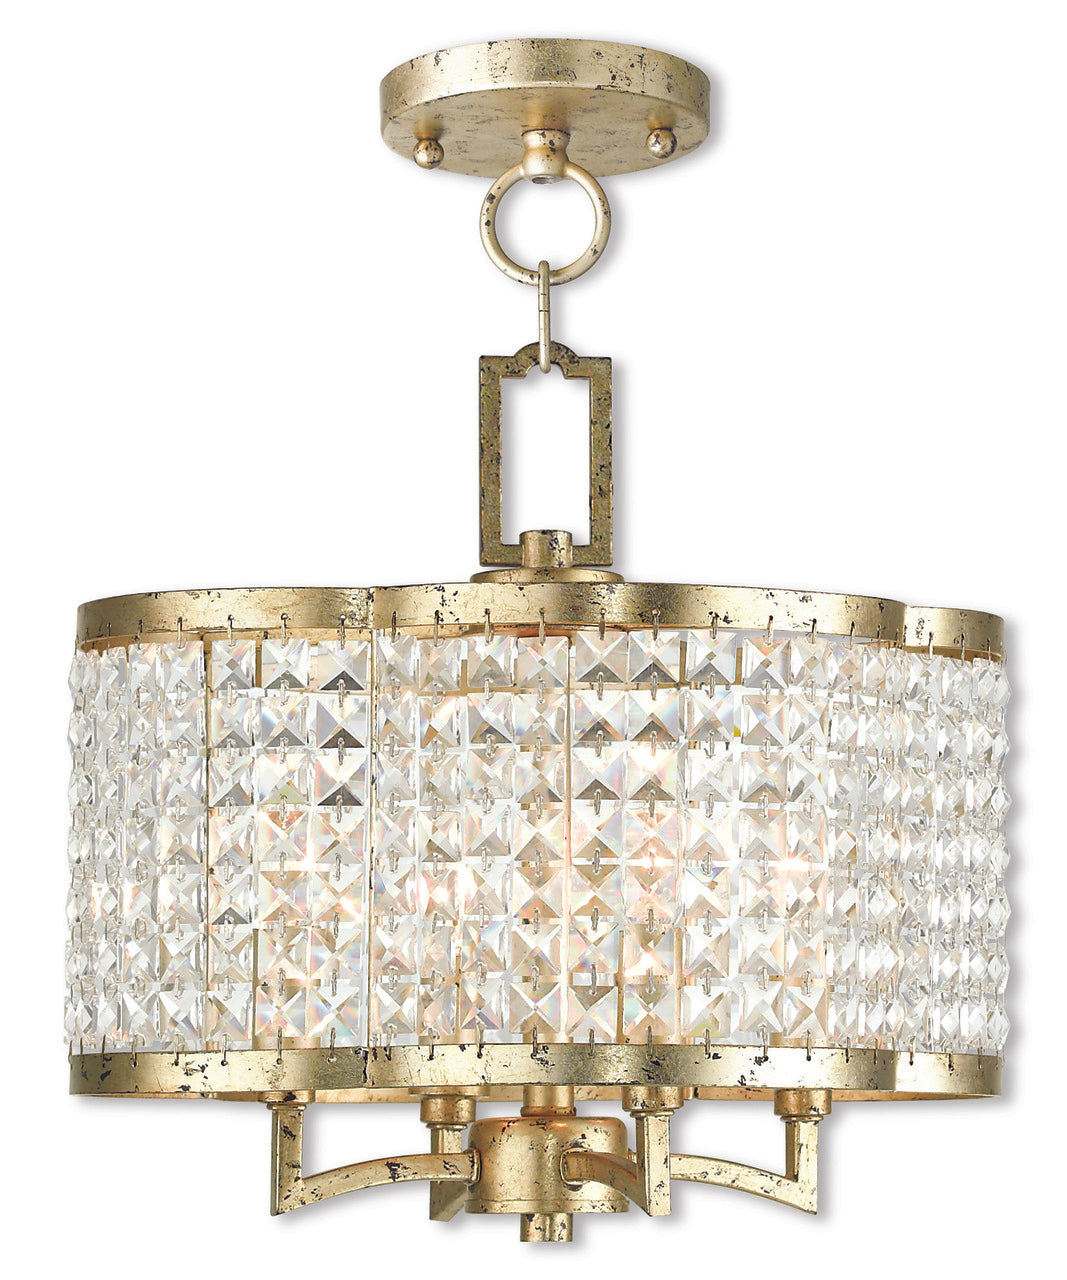 LIVEX Lighting 50574-28 Grammercy Convertible Mini Chandelier/Flushmount with Hand-Applied Winter Gold (4 Light)